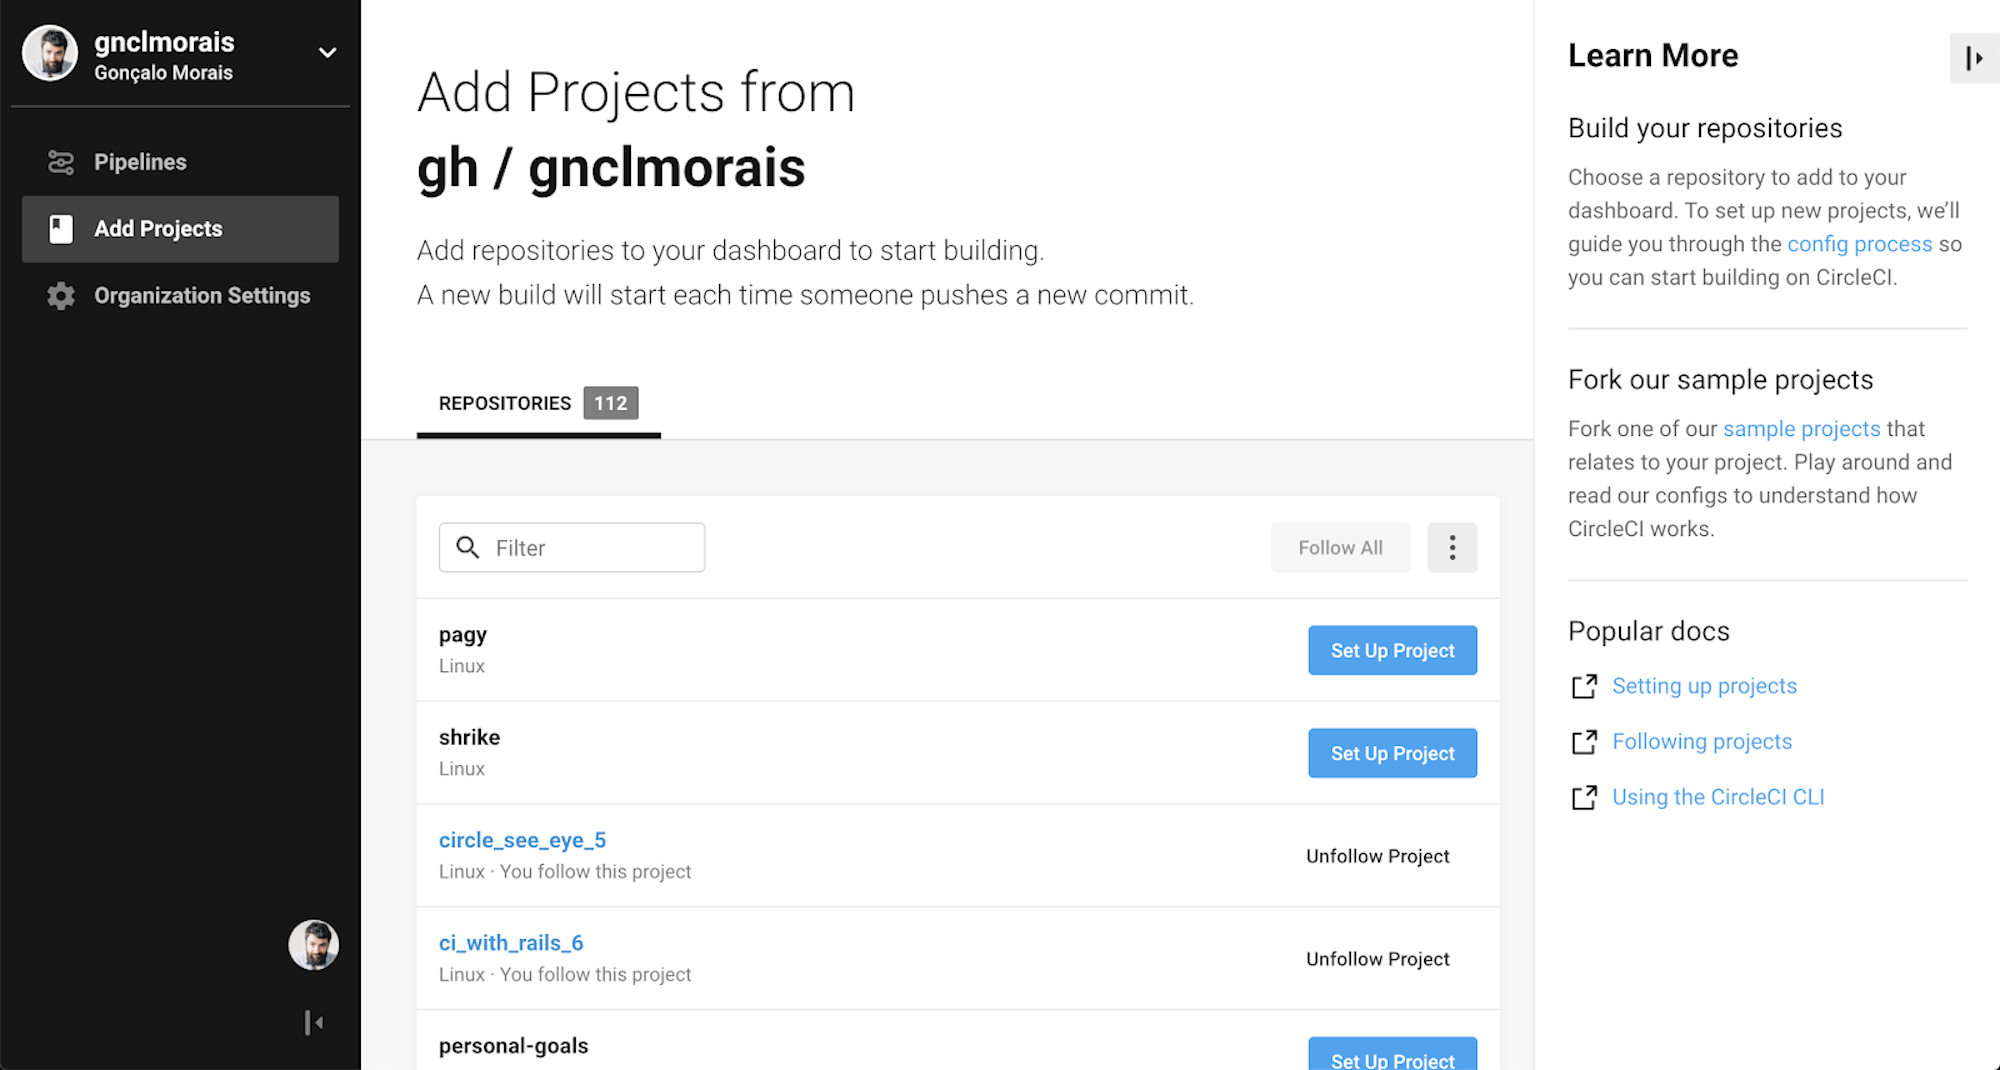 Add Projects from… screen of CircleCI